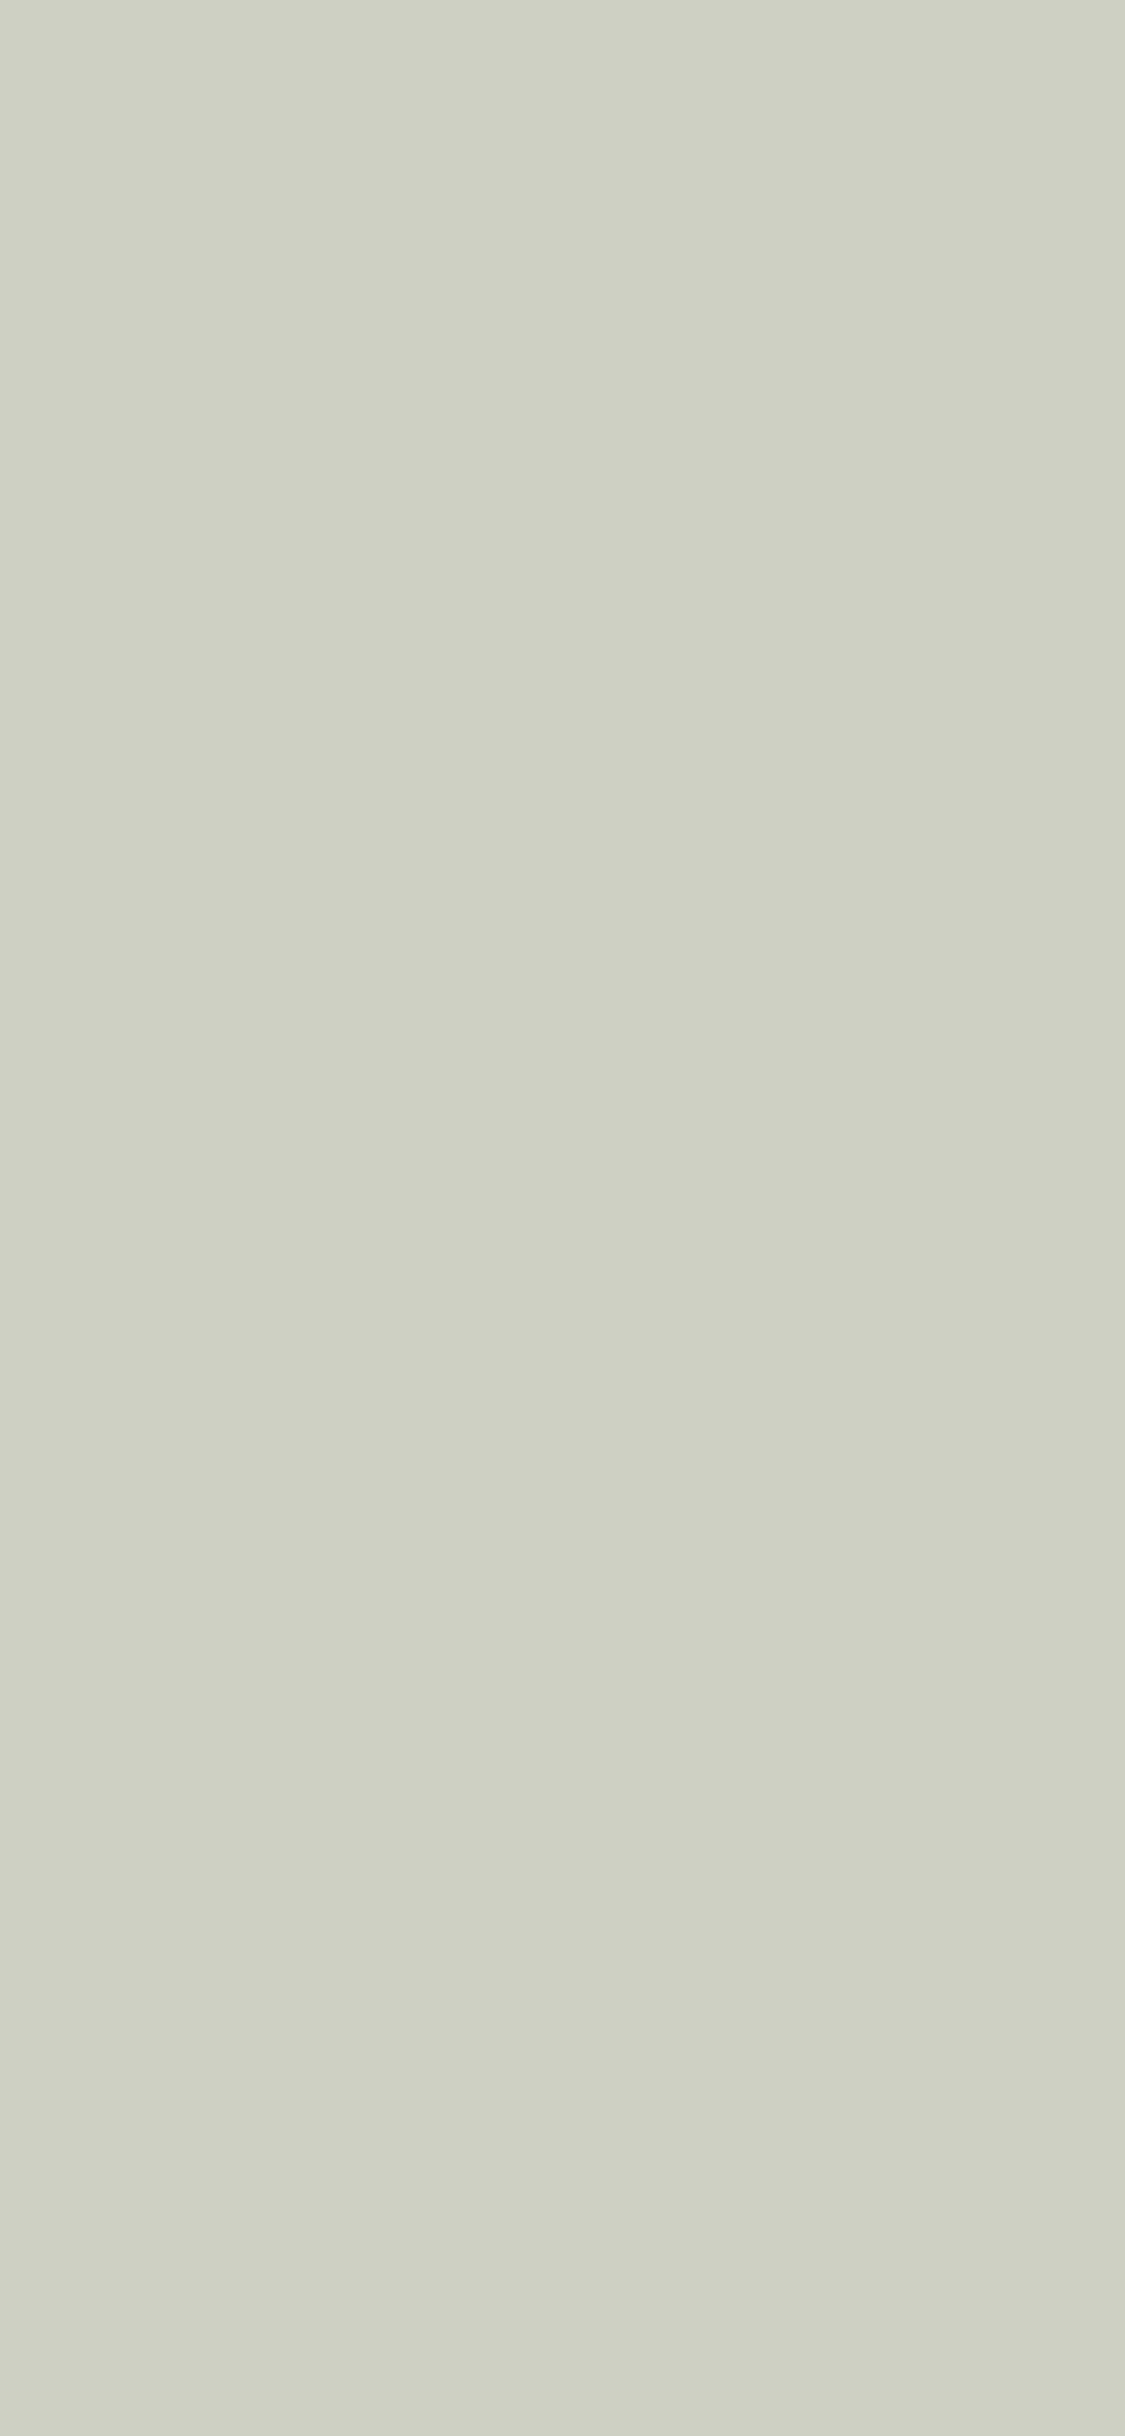 1125x2436 Pastel Gray Solid Color Background